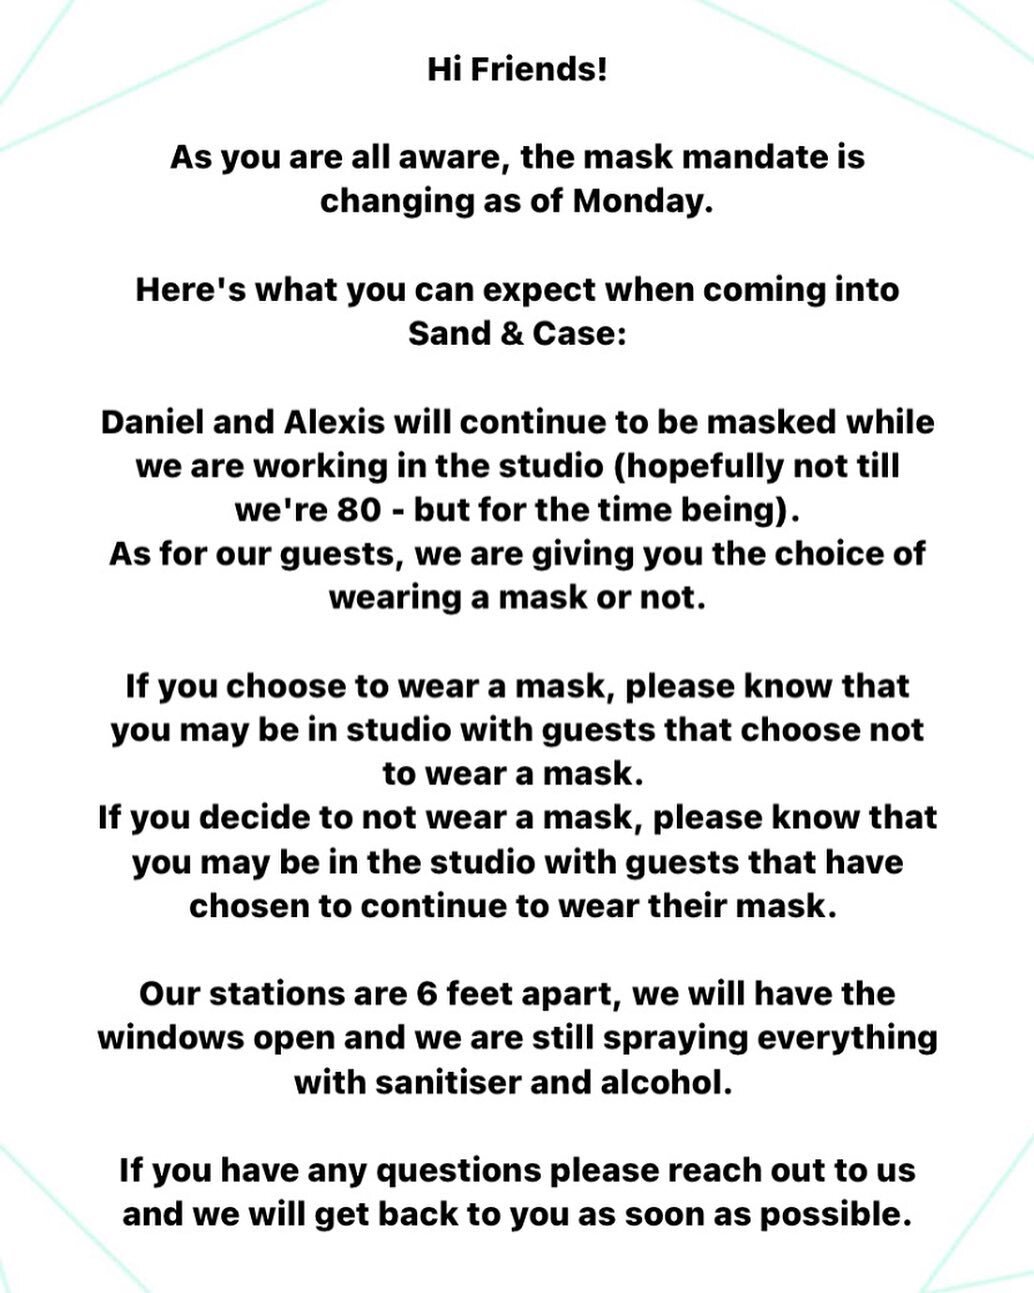 Hi friends! We sent out an email regarding the new mask mandate and how we&rsquo;ve decided to go forward. 
If you don&rsquo;t receive our promotional emails, please check your settings in Vagaro. 
Looking forward to seeing you all! And who knows, we